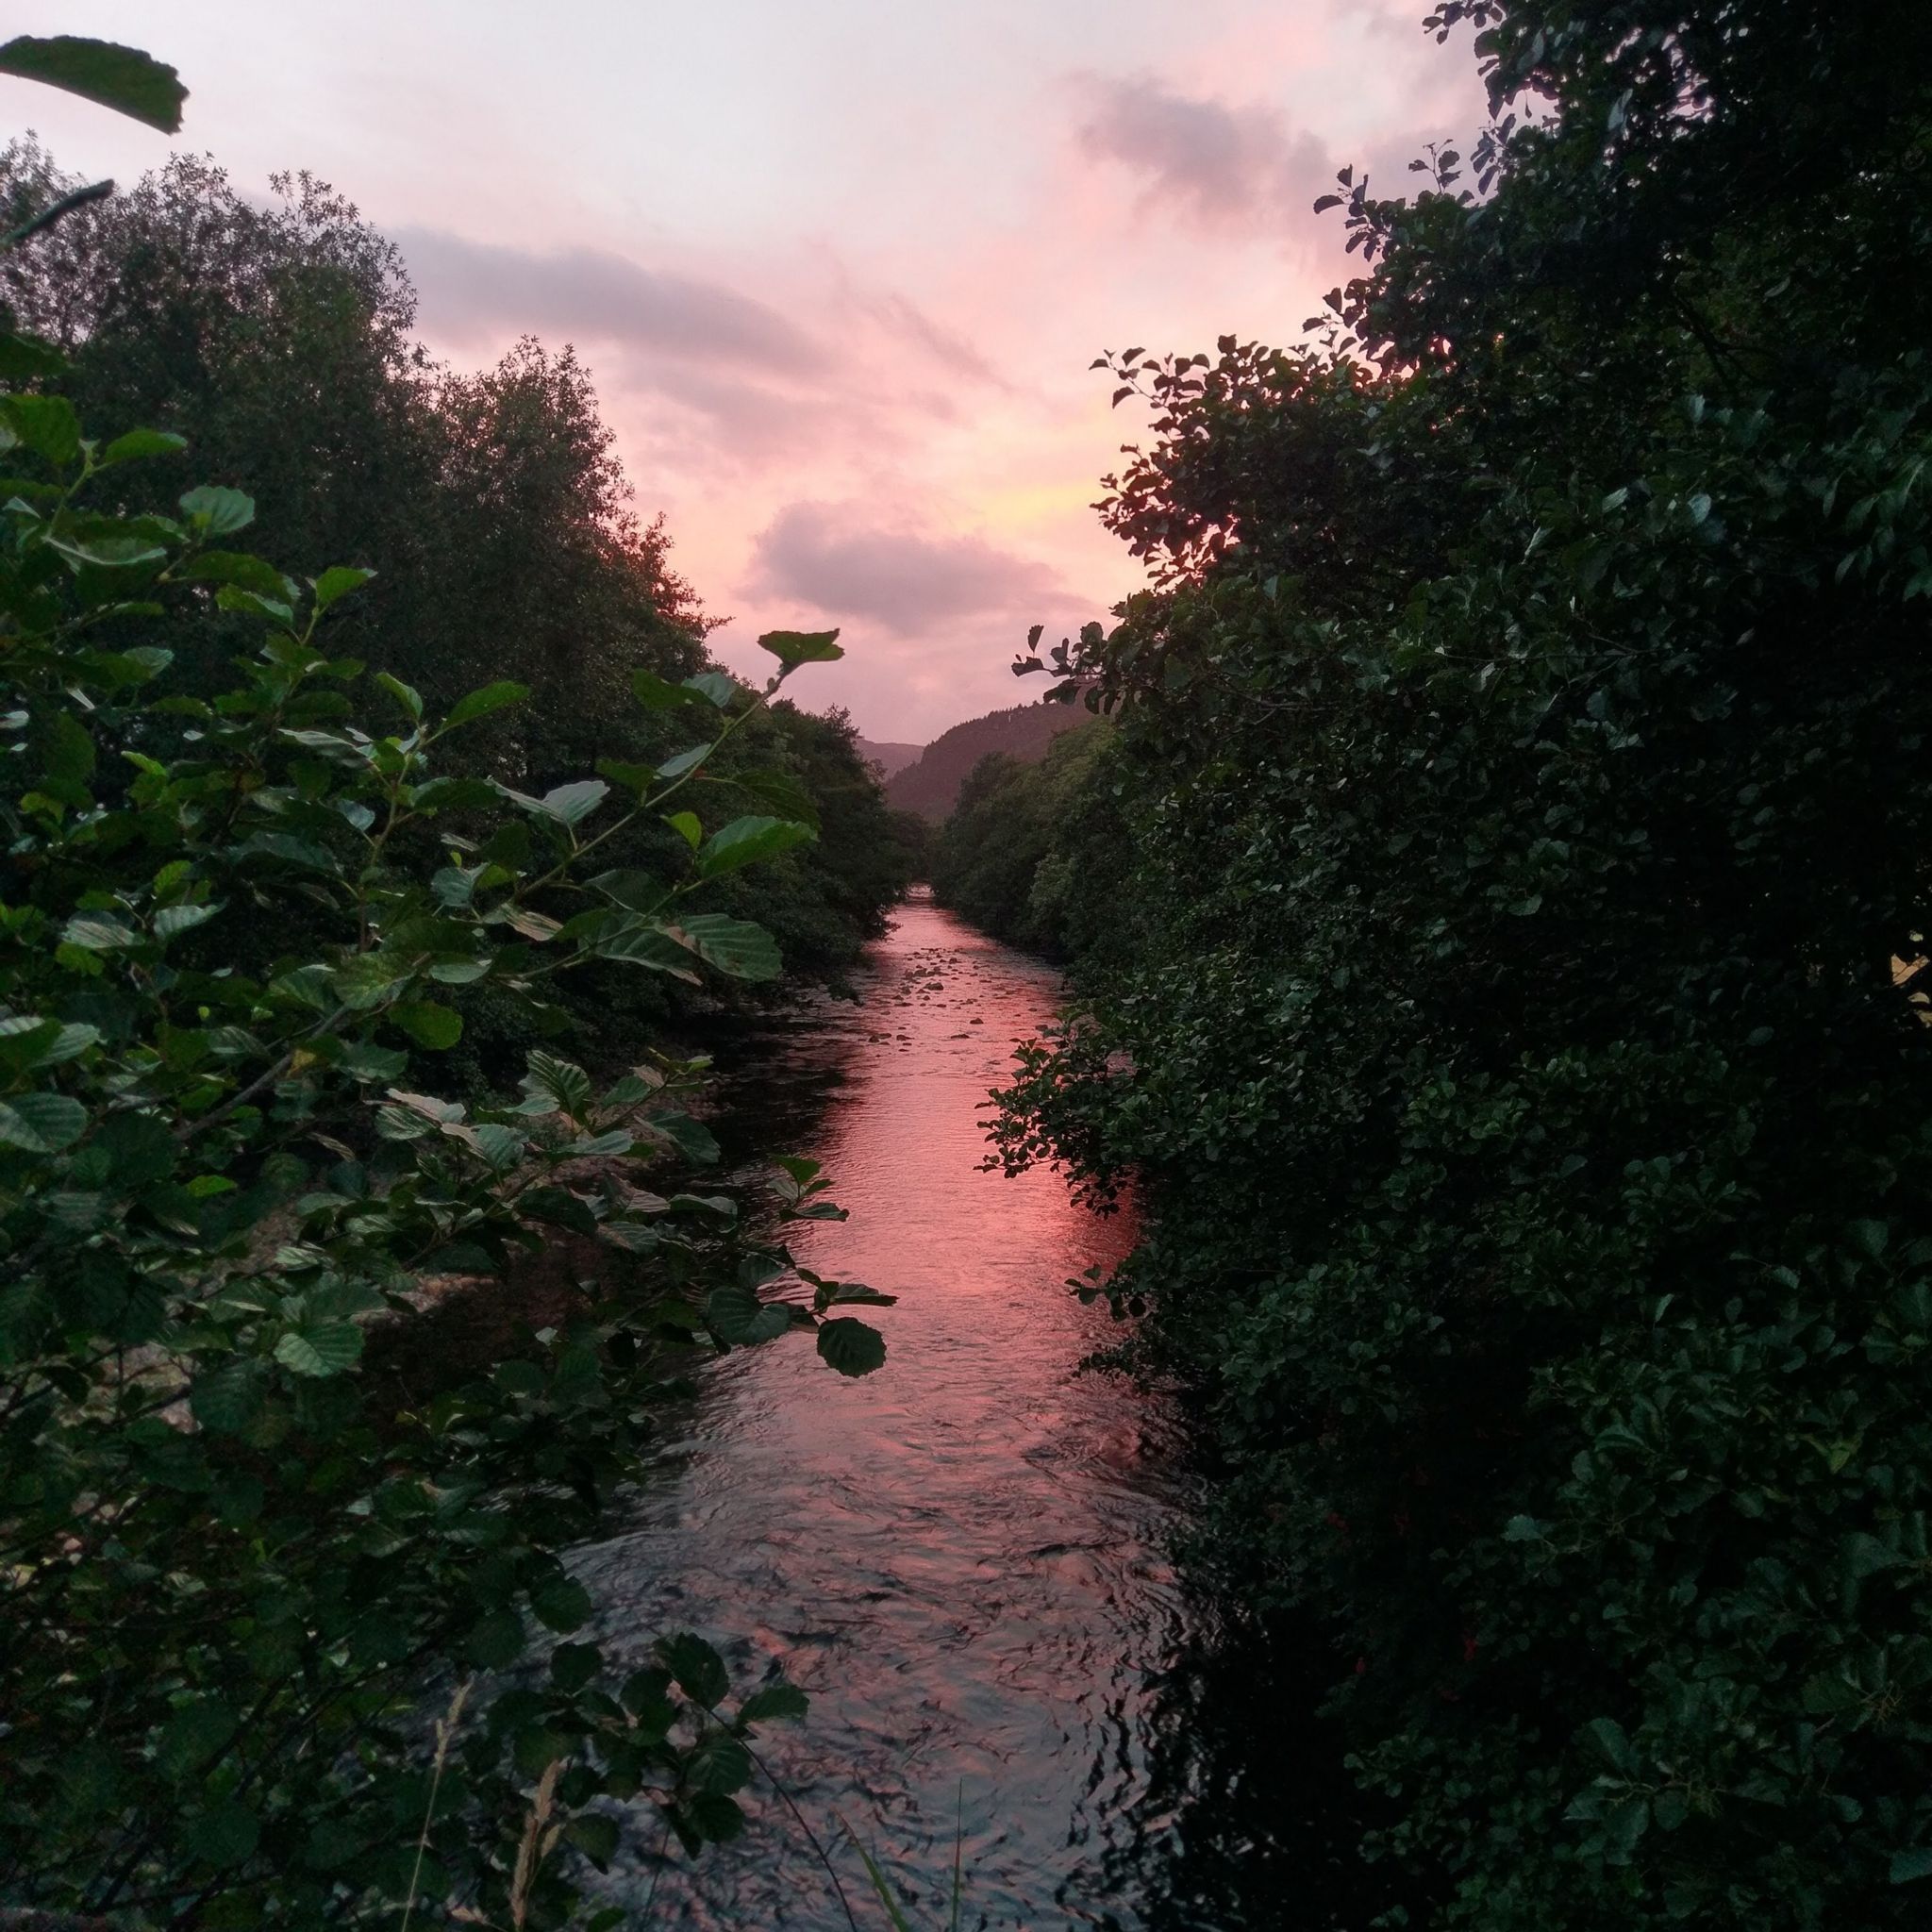 River Croe at sunset